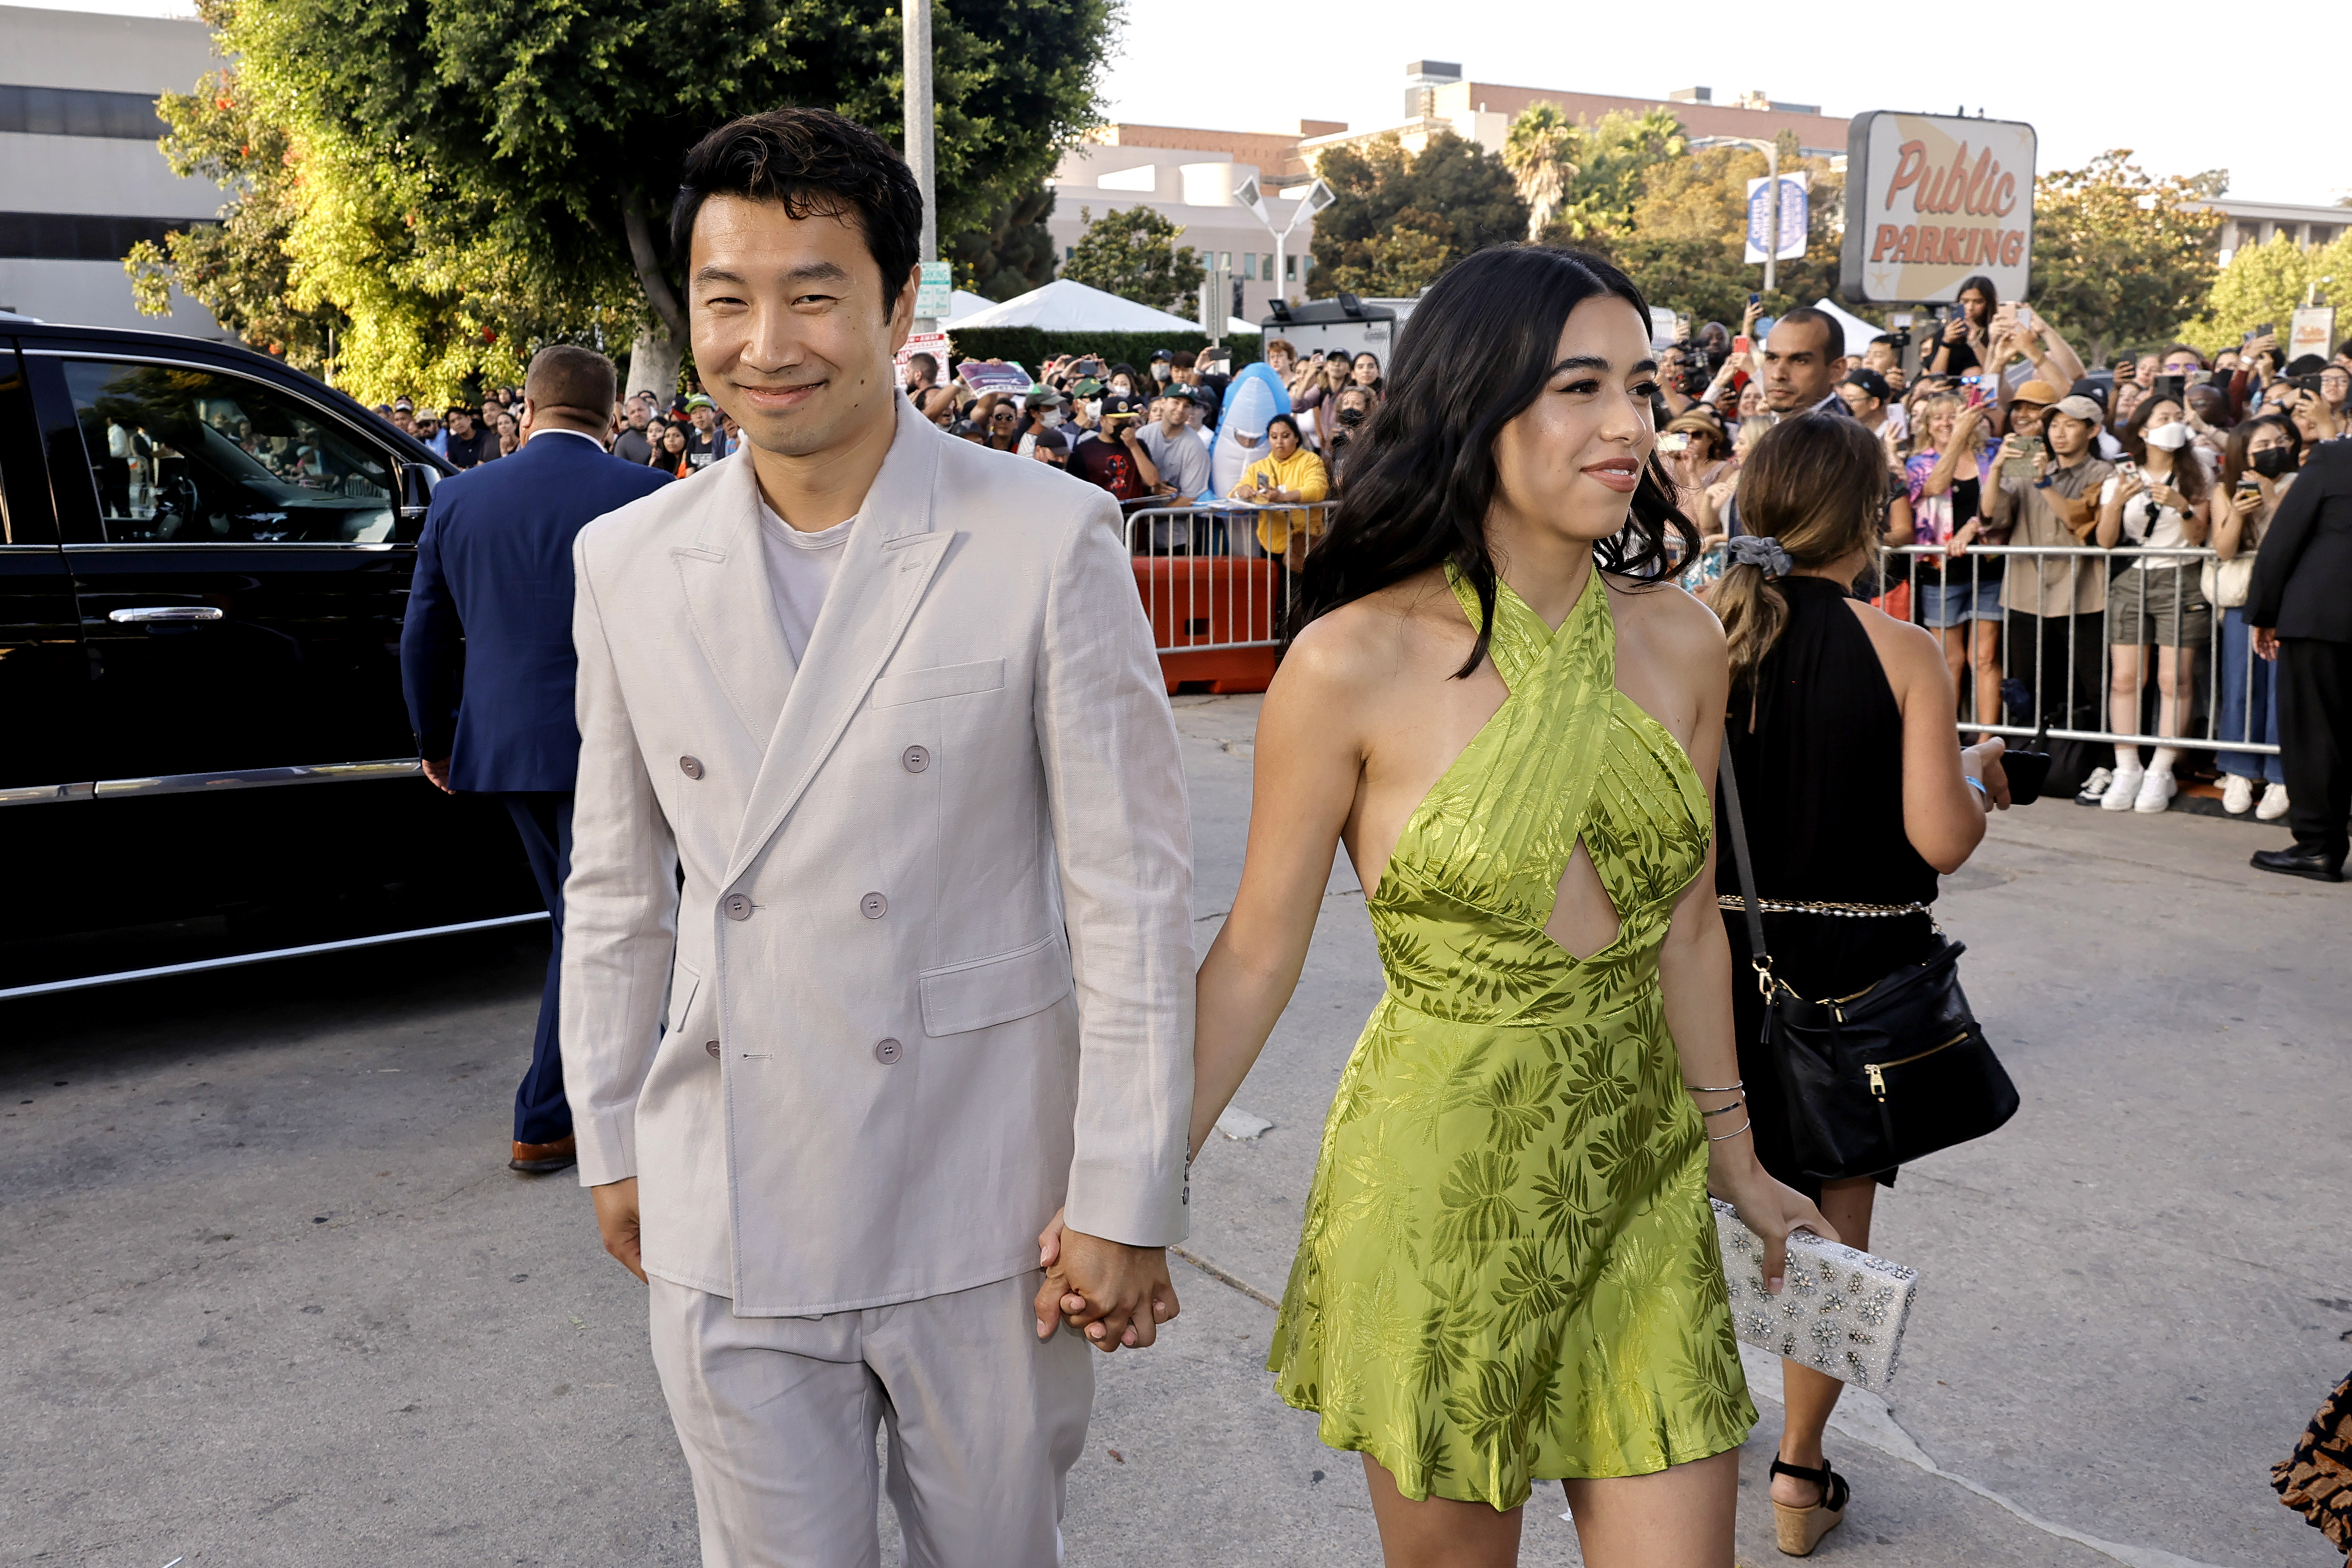 Simu Liu and Jade Bender at the premiere of "Bullet Train" on August 1, 2022, in Los Angeles, California. | Source: Getty Images